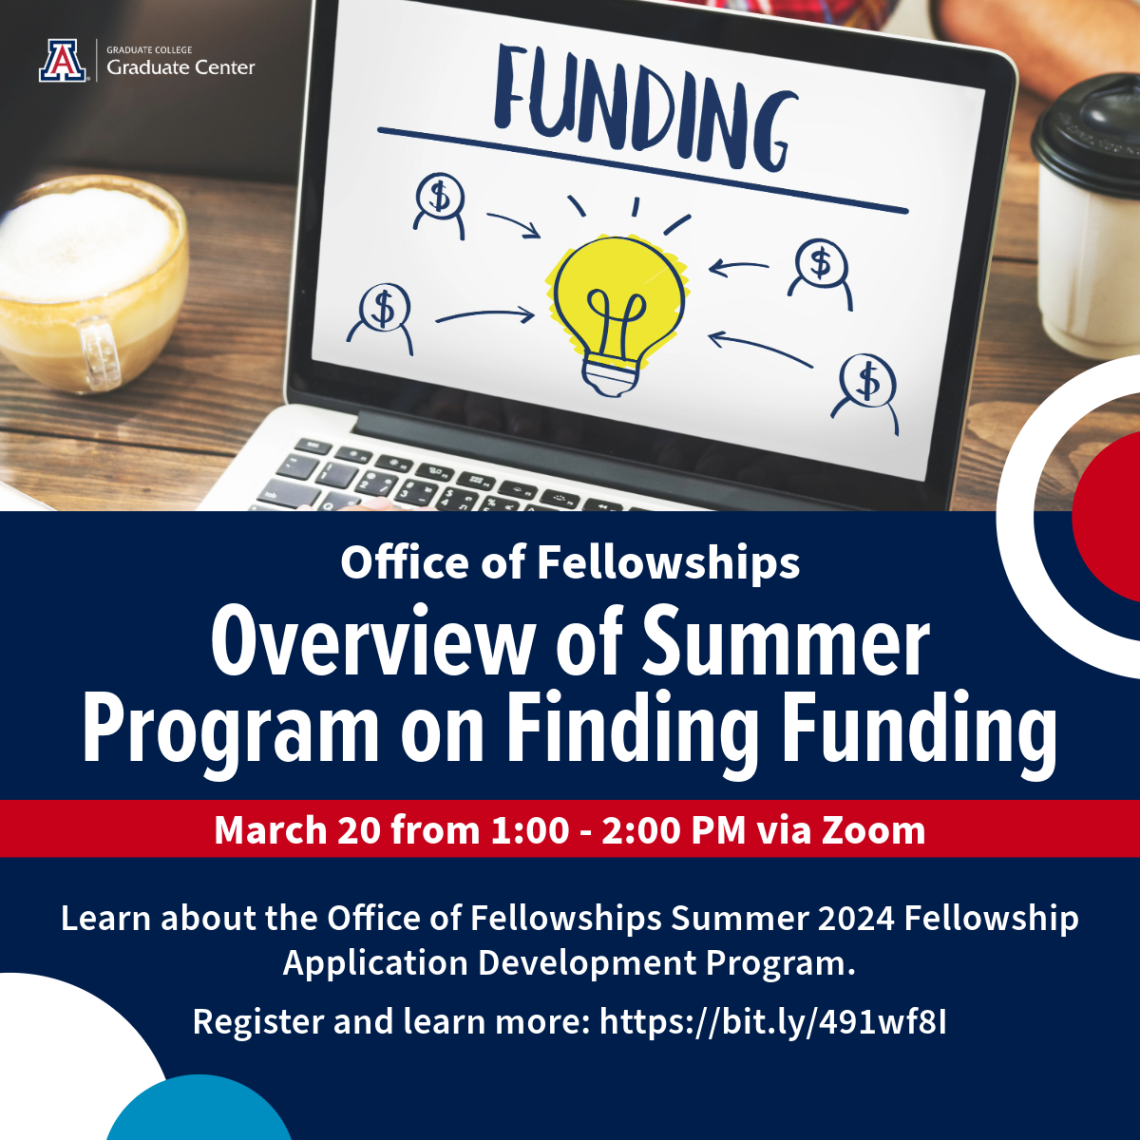 Image with information regarding the overview of summer program on finding funding, same text is provided below. 